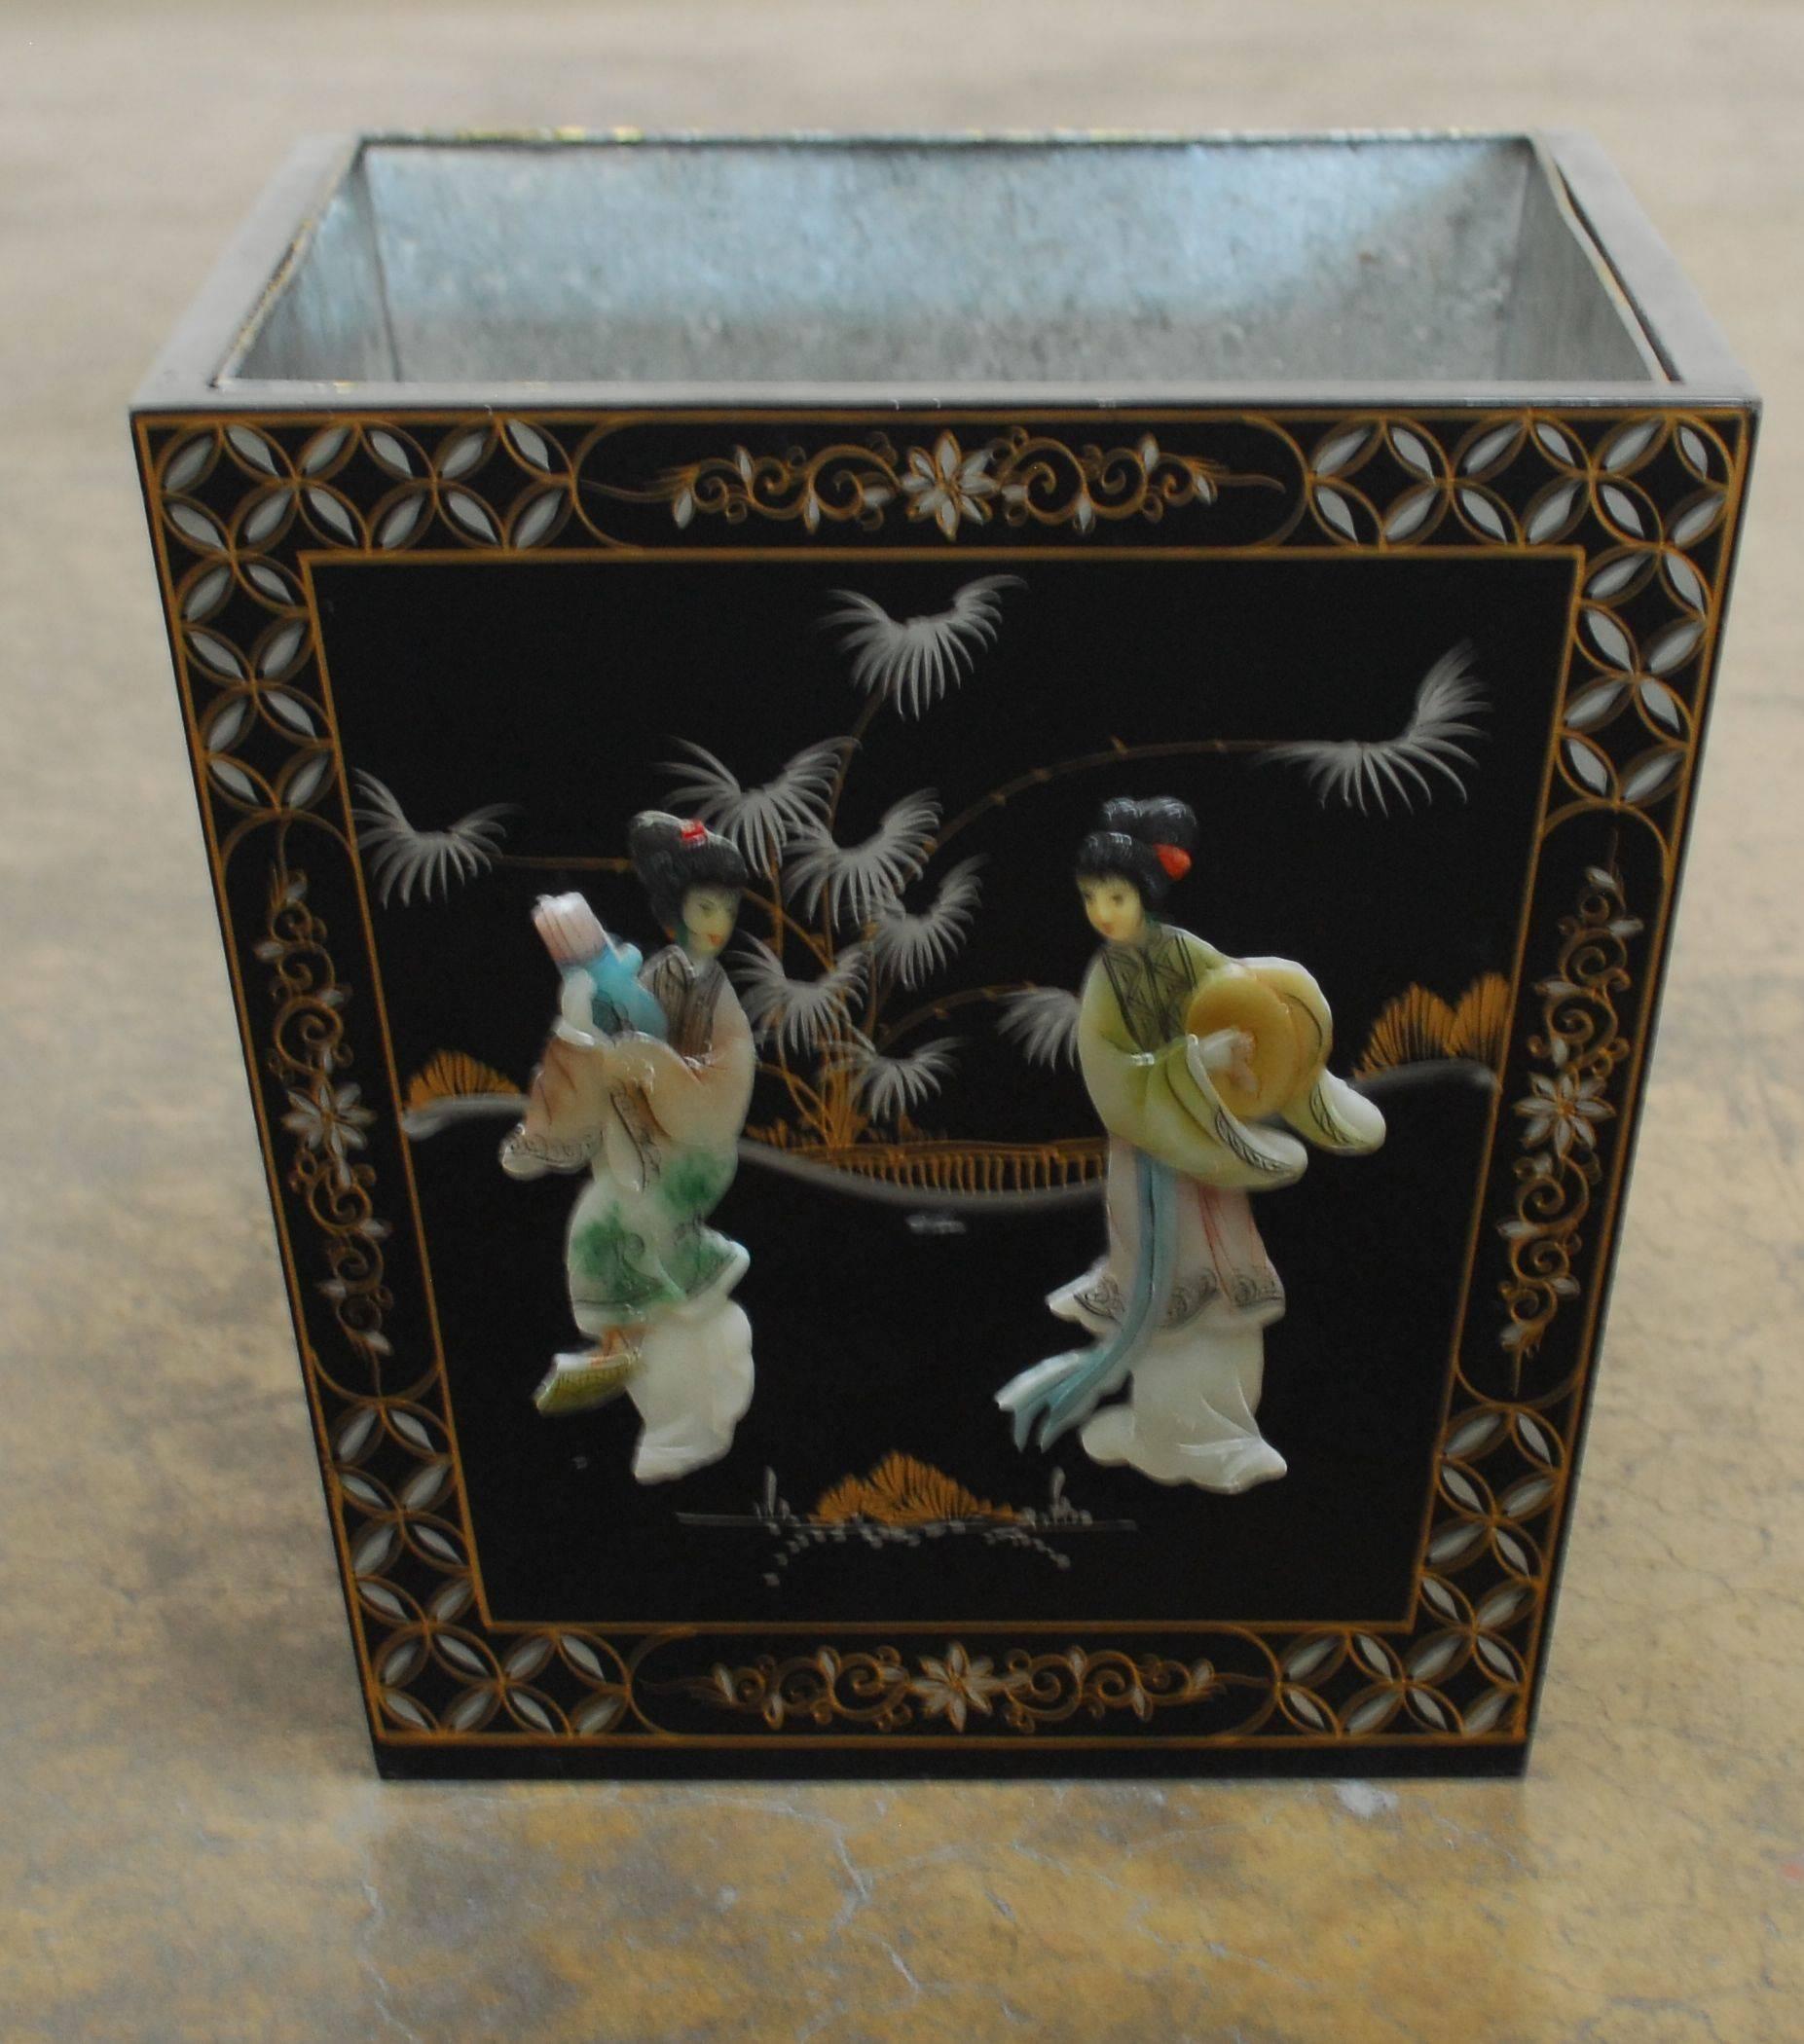 Chinese black lacquer planter box or jardiniere featuring hard stone decoration depicting 2 beauties on each side. Hand painted borders and landscapes in gilt and pearl white decorate the background. Removable zinc lining makes this a perfect